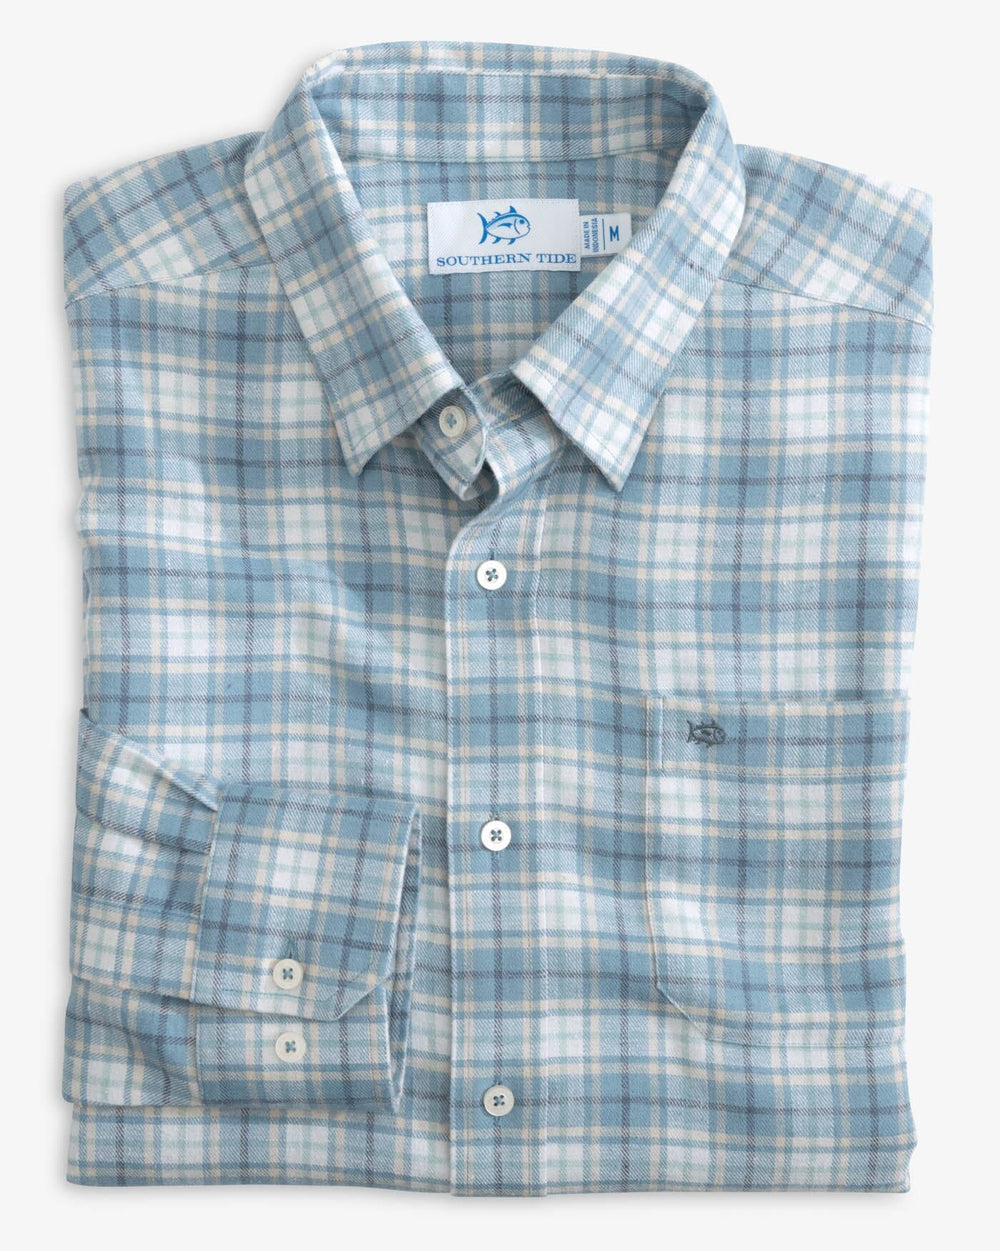 The folded view of the Southern Tide Beach Flannel Heather Howland Plaid Sport Shirt by Southern Tide - Heather Mountain Spring Blue